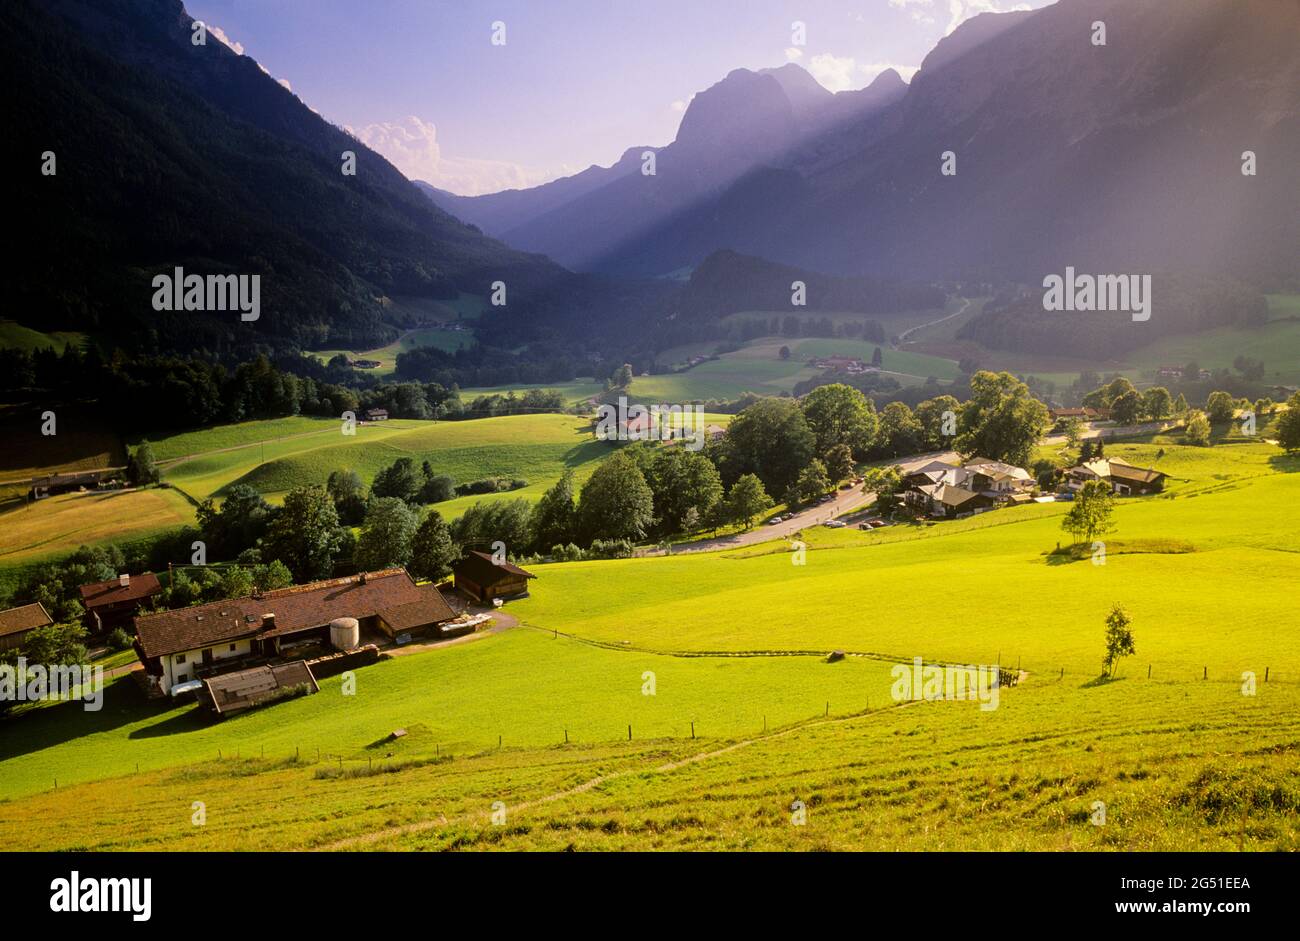 Rural landscape with field and mountains, Berchtesgaden, Bavaria, Germany Stock Photo